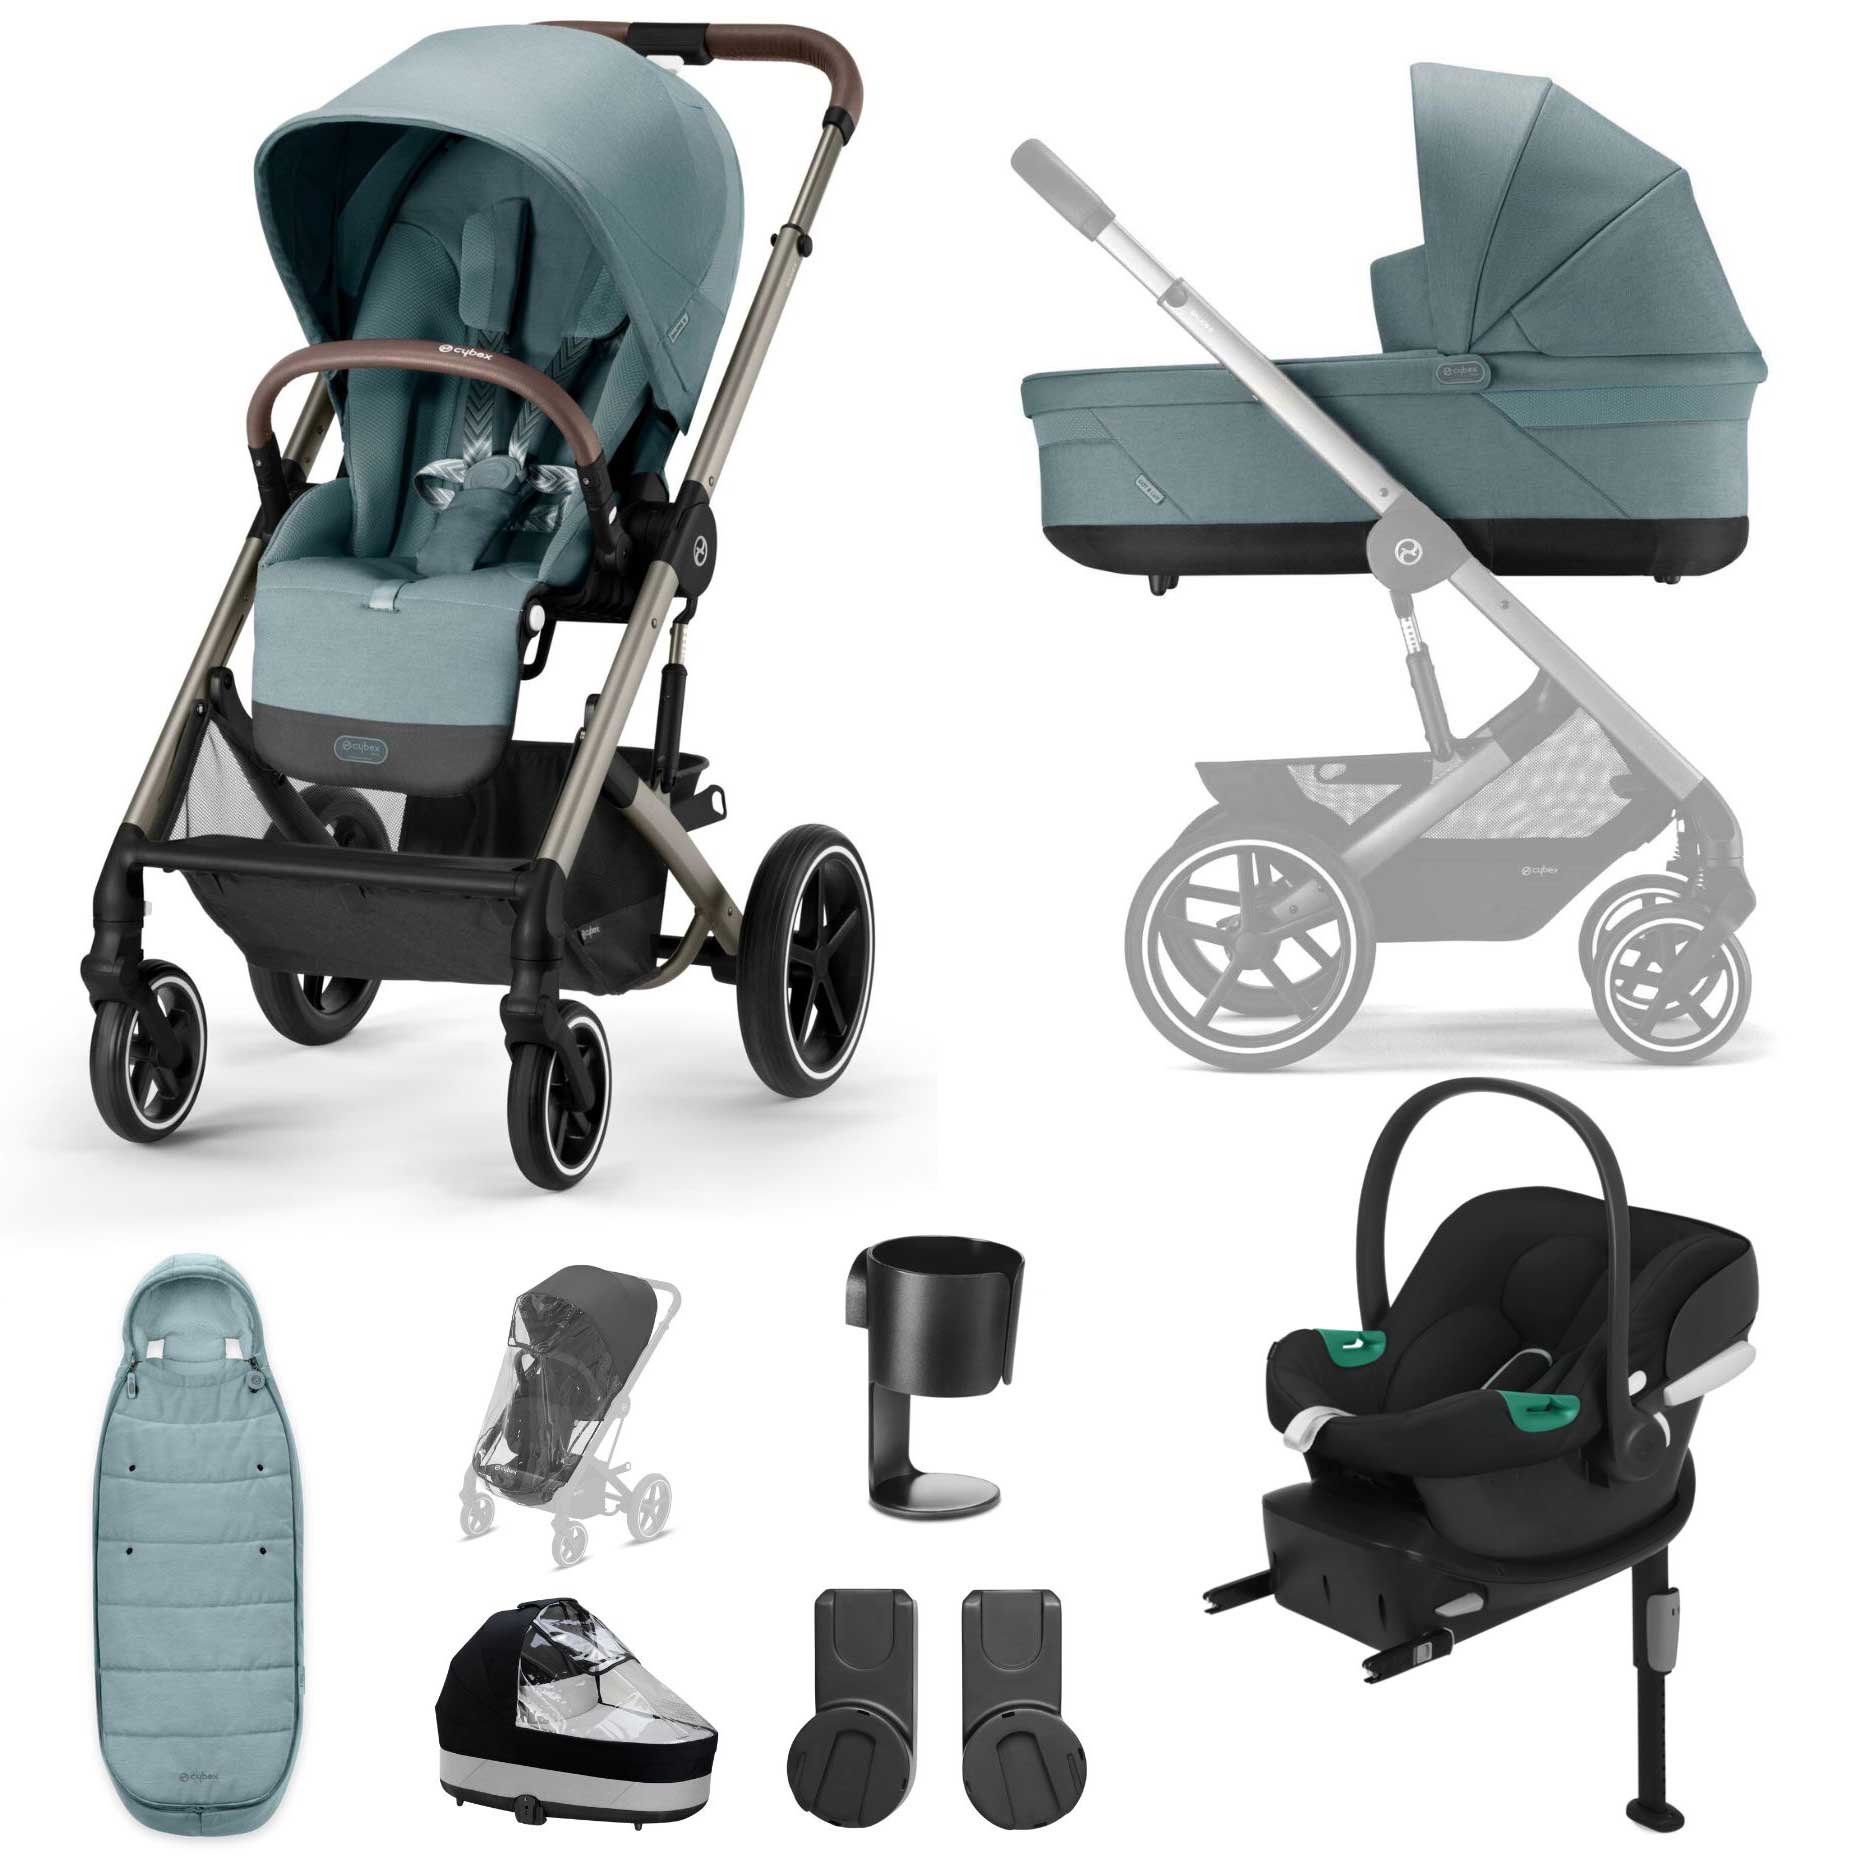 Cybex Balios S Lux Comfort Bundle in Taupe/Sky Blue Travel Systems 14652-TPE-SKY-BLU 4063846318049